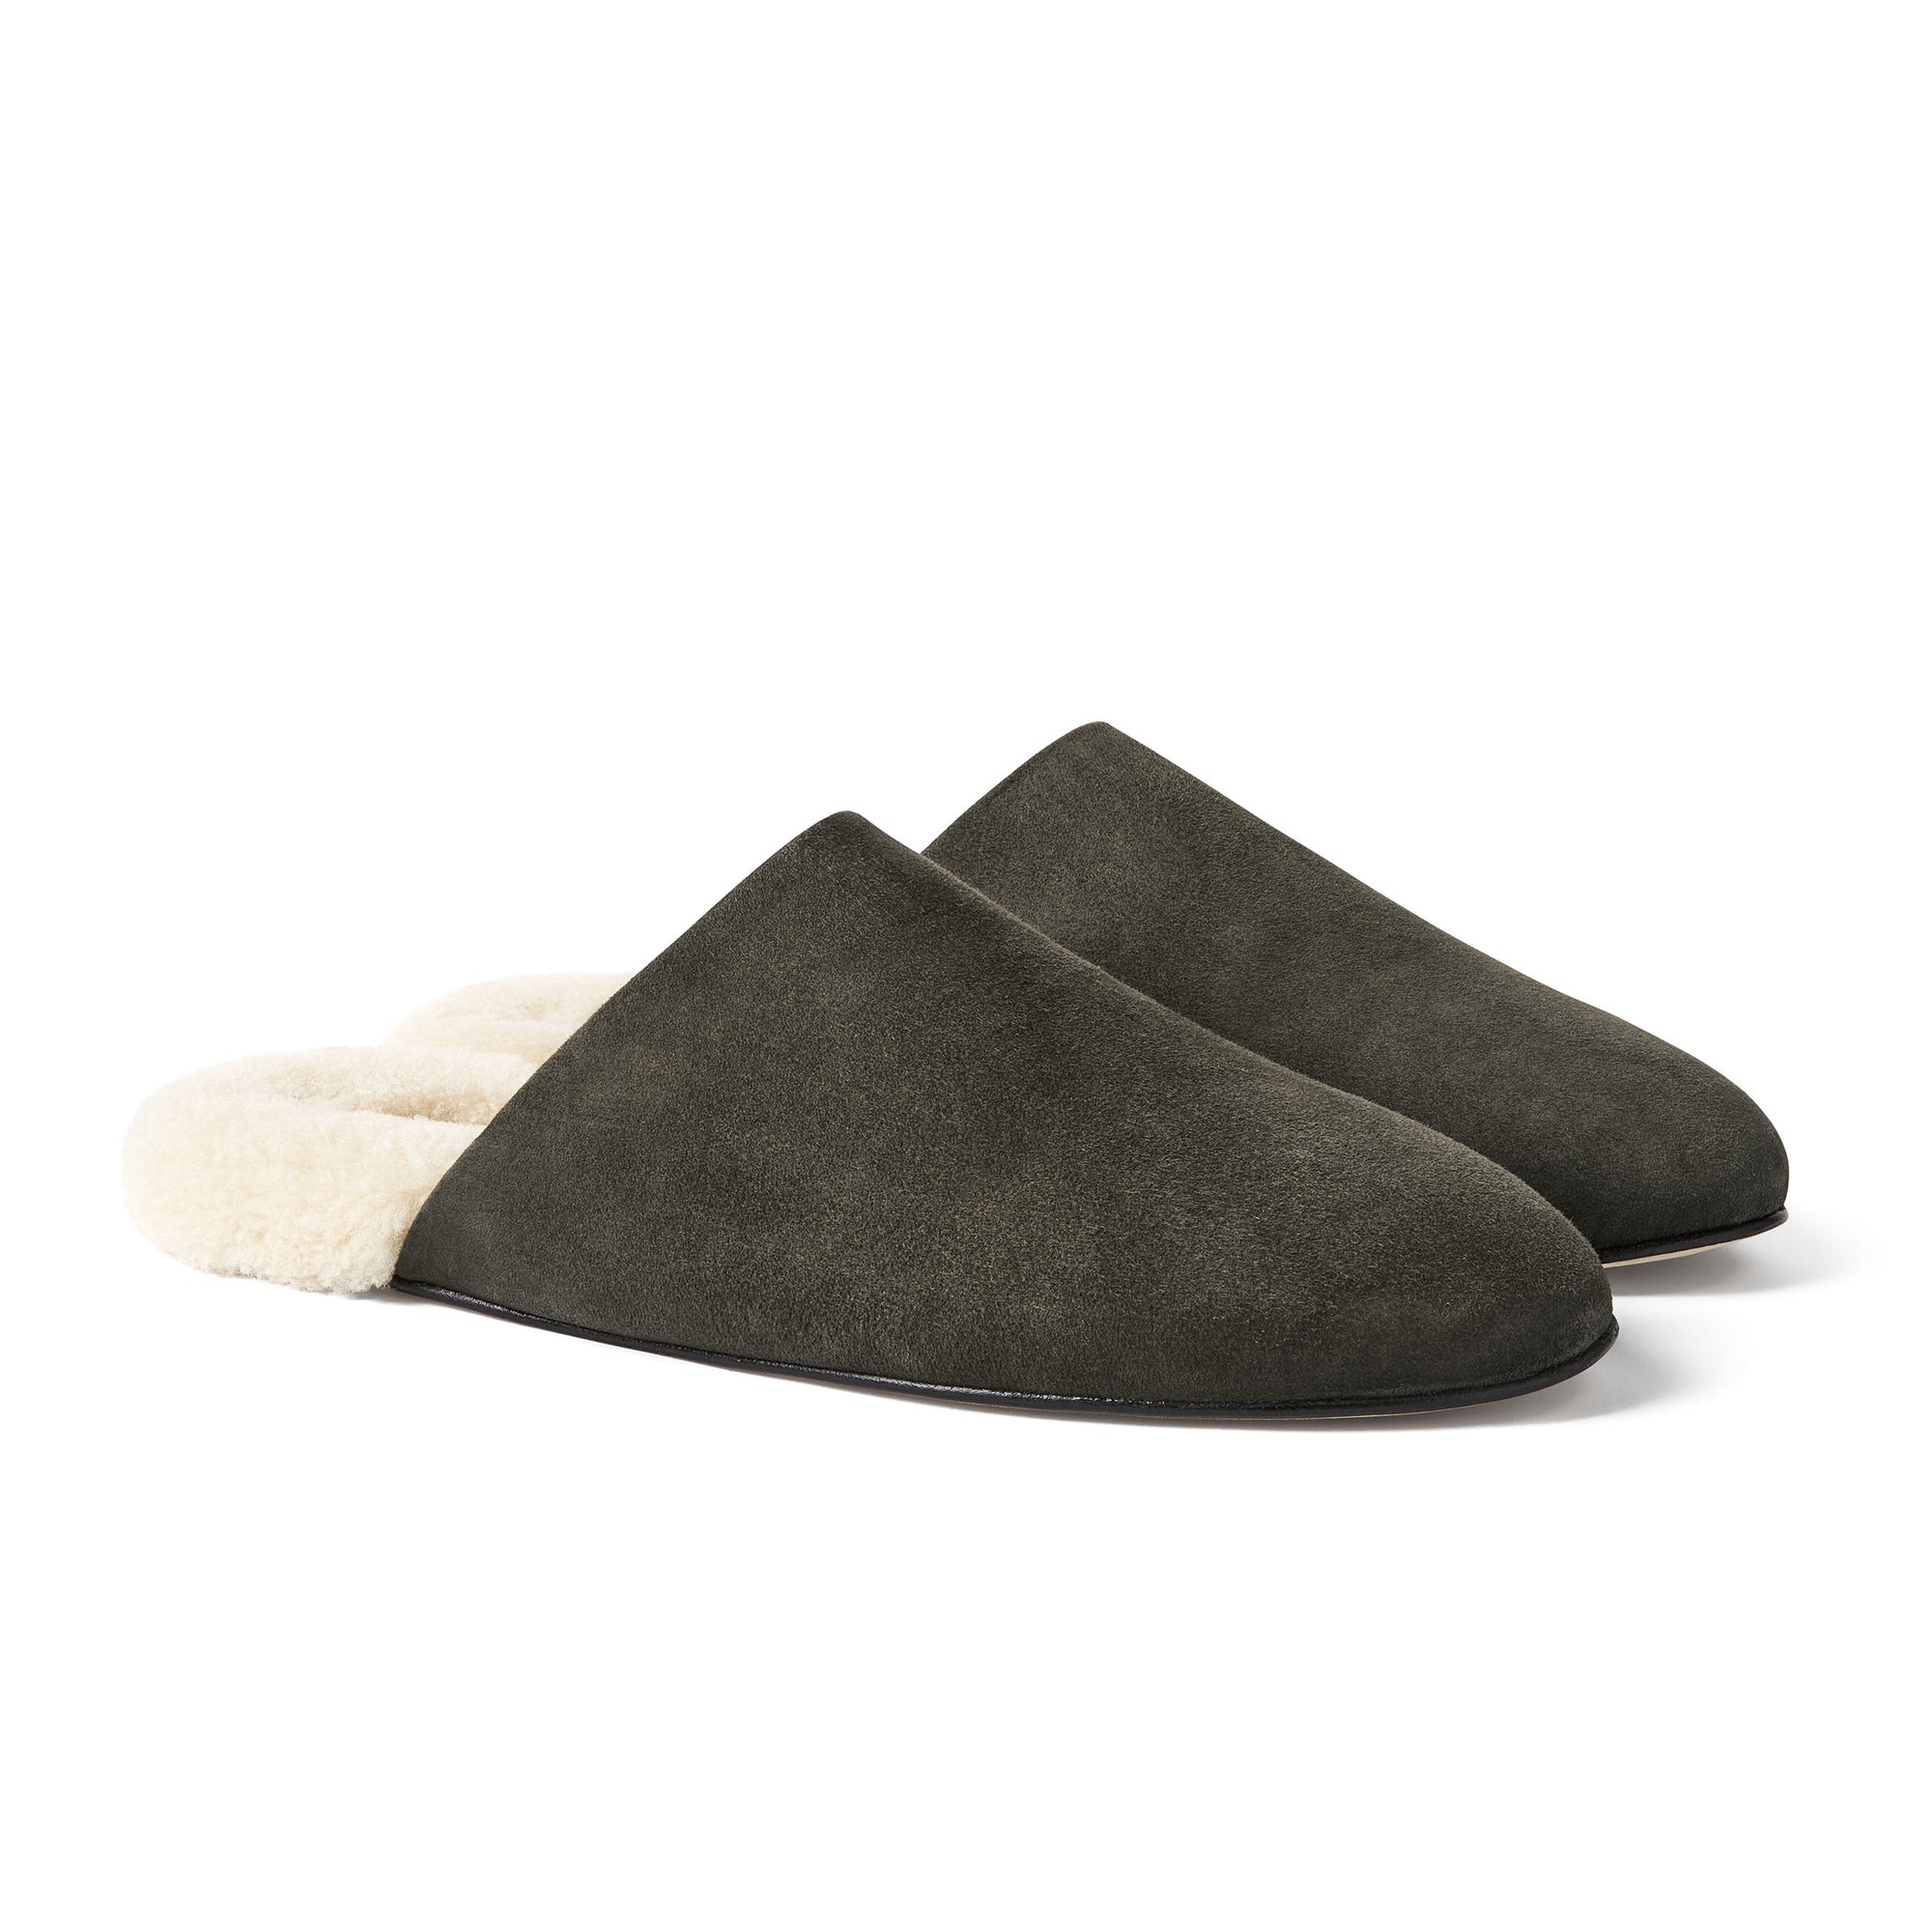 Inabo Men's Slider slippers in army suede and white shearling